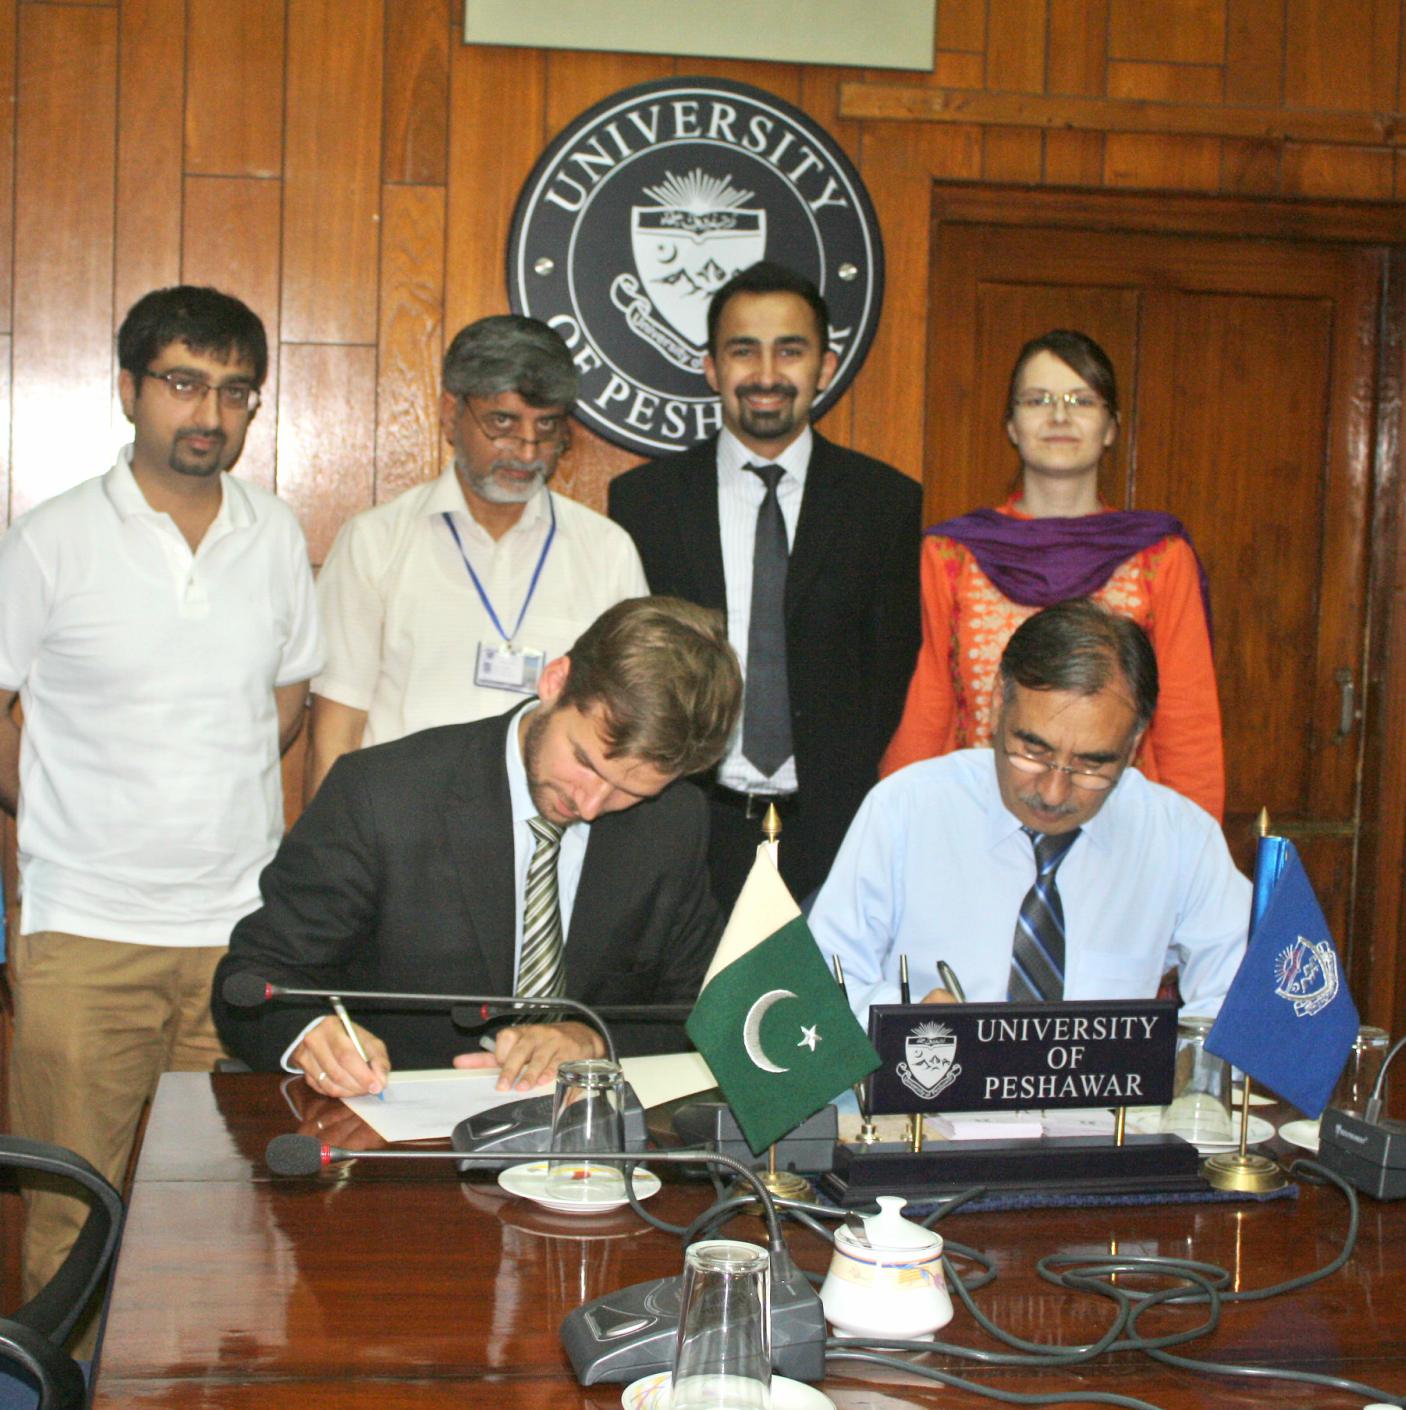 Vice Chancellor UoP Prof. Dr. Muhammad Rasul Jan and Kristof W. Duwaerts of Hans Seidel Foundation Signing MoU at the UoP